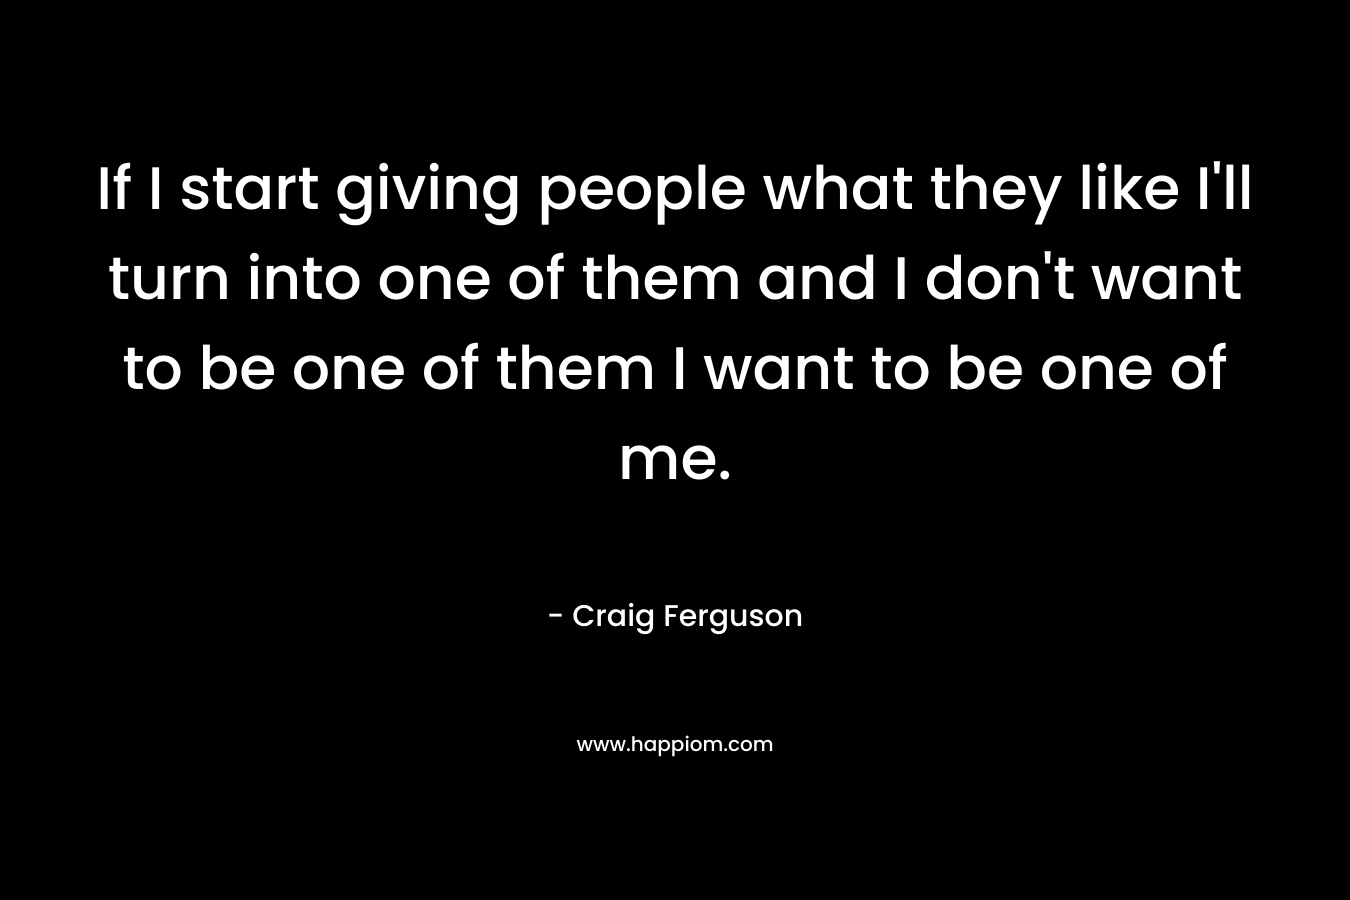 If I start giving people what they like I’ll turn into one of them and I don’t want to be one of them I want to be one of me. – Craig Ferguson